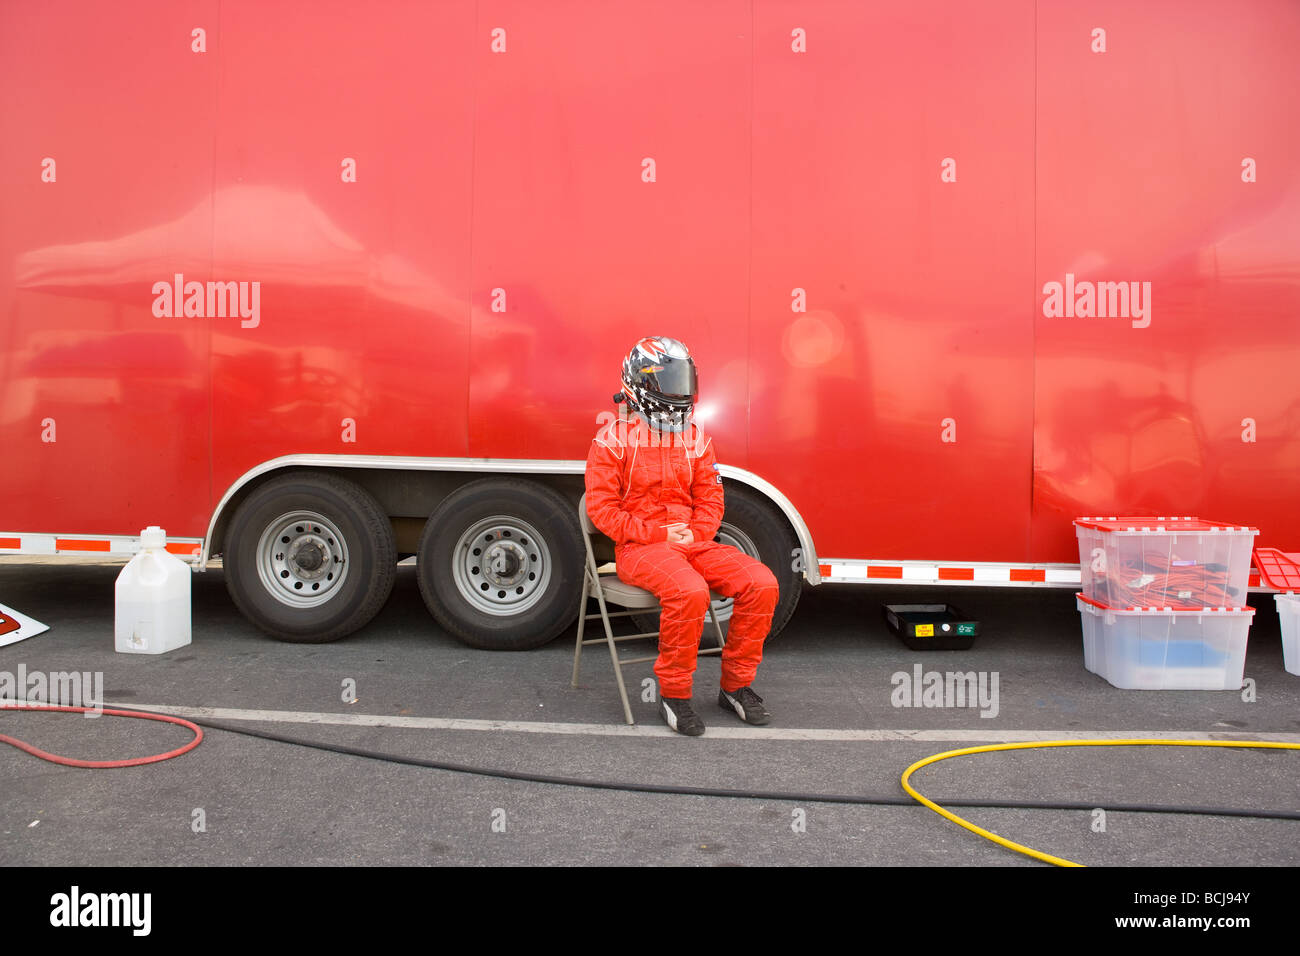 Race car driver wearing helmet and red jump suit sitting in chair in front of red transport vehicle  Stock Photo